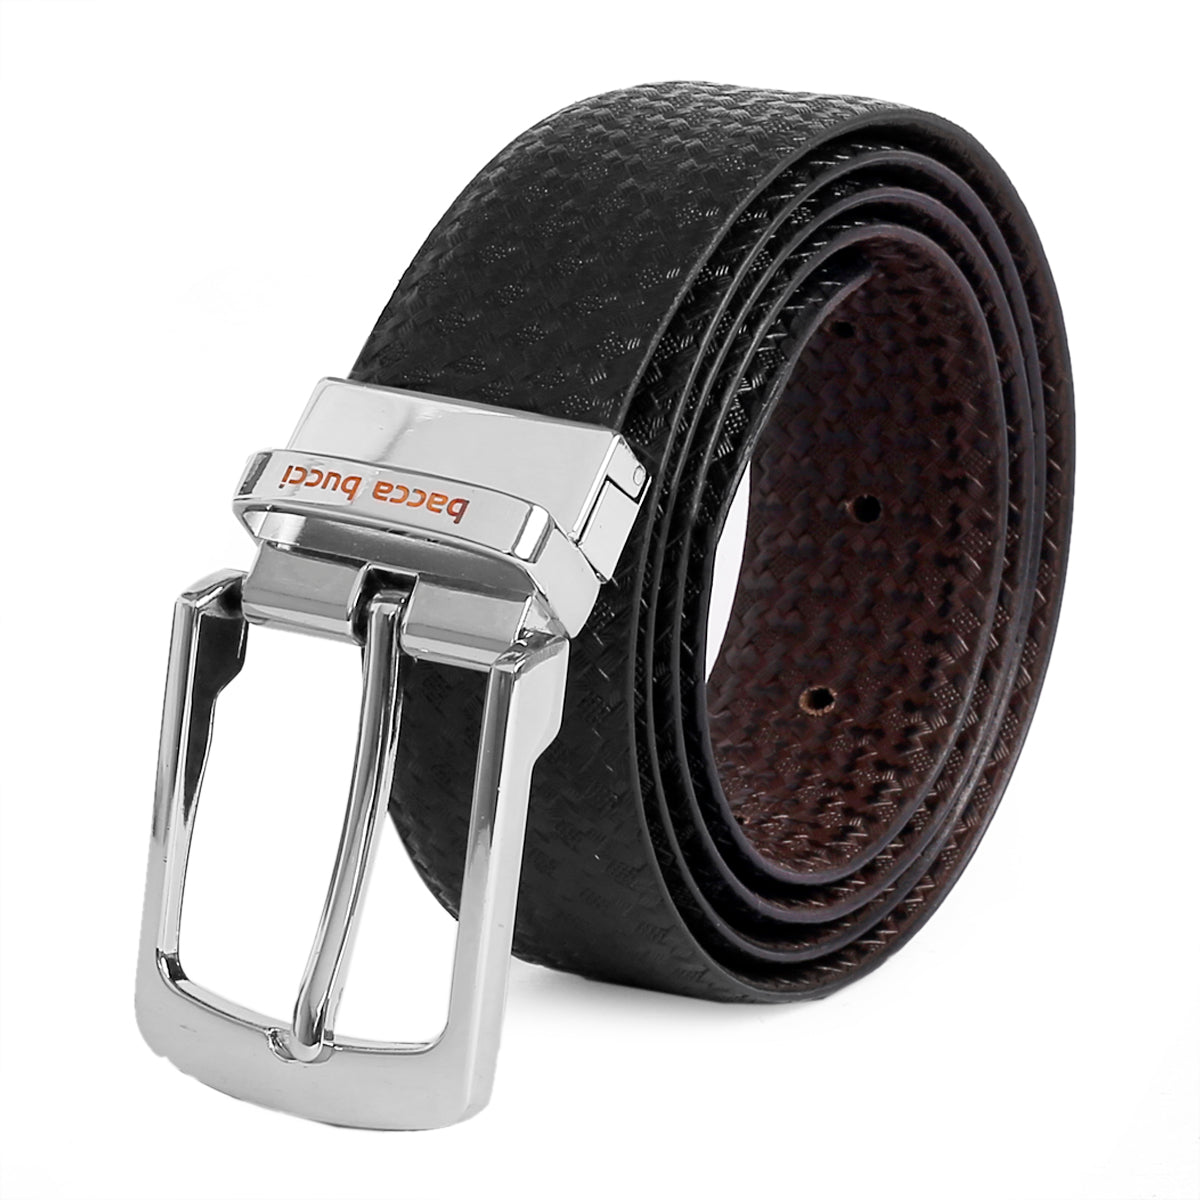 Bacca Bucci Reversible Classic Dress belt with Italian smooth Genuine leather Black & Brown - Bacca Bucci